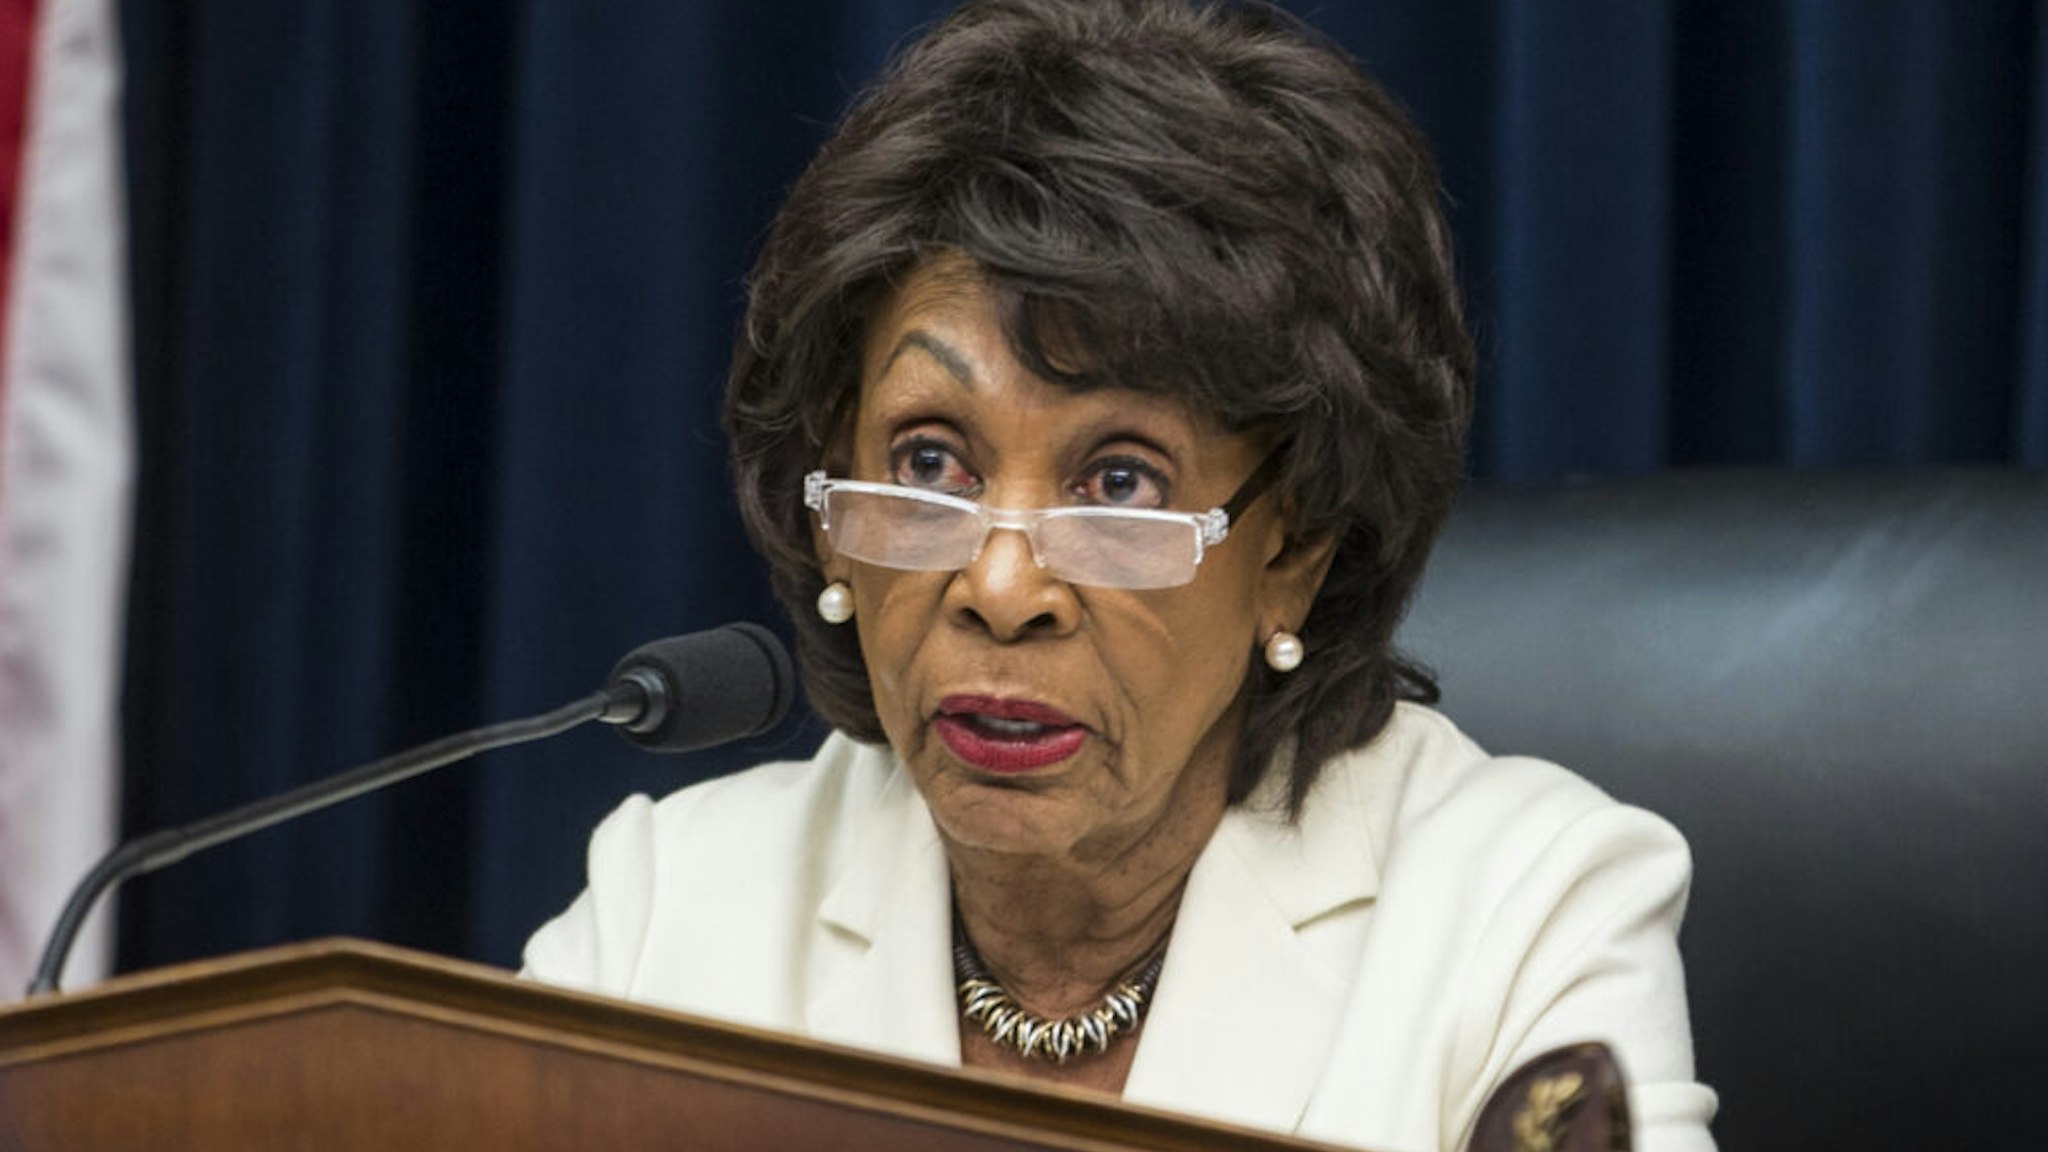 WASHINGTON, DC - APRIL 09: House Financial Services Committee Chairman Maxine Waters (D-CA) speaks during a House Financial Services Committee Hearing on Capitol Hill on April 9, 2019 in Washington, DC. U.S. Secretary of Treasury Steve Mnuchin is testifying on the state of the international financial system.